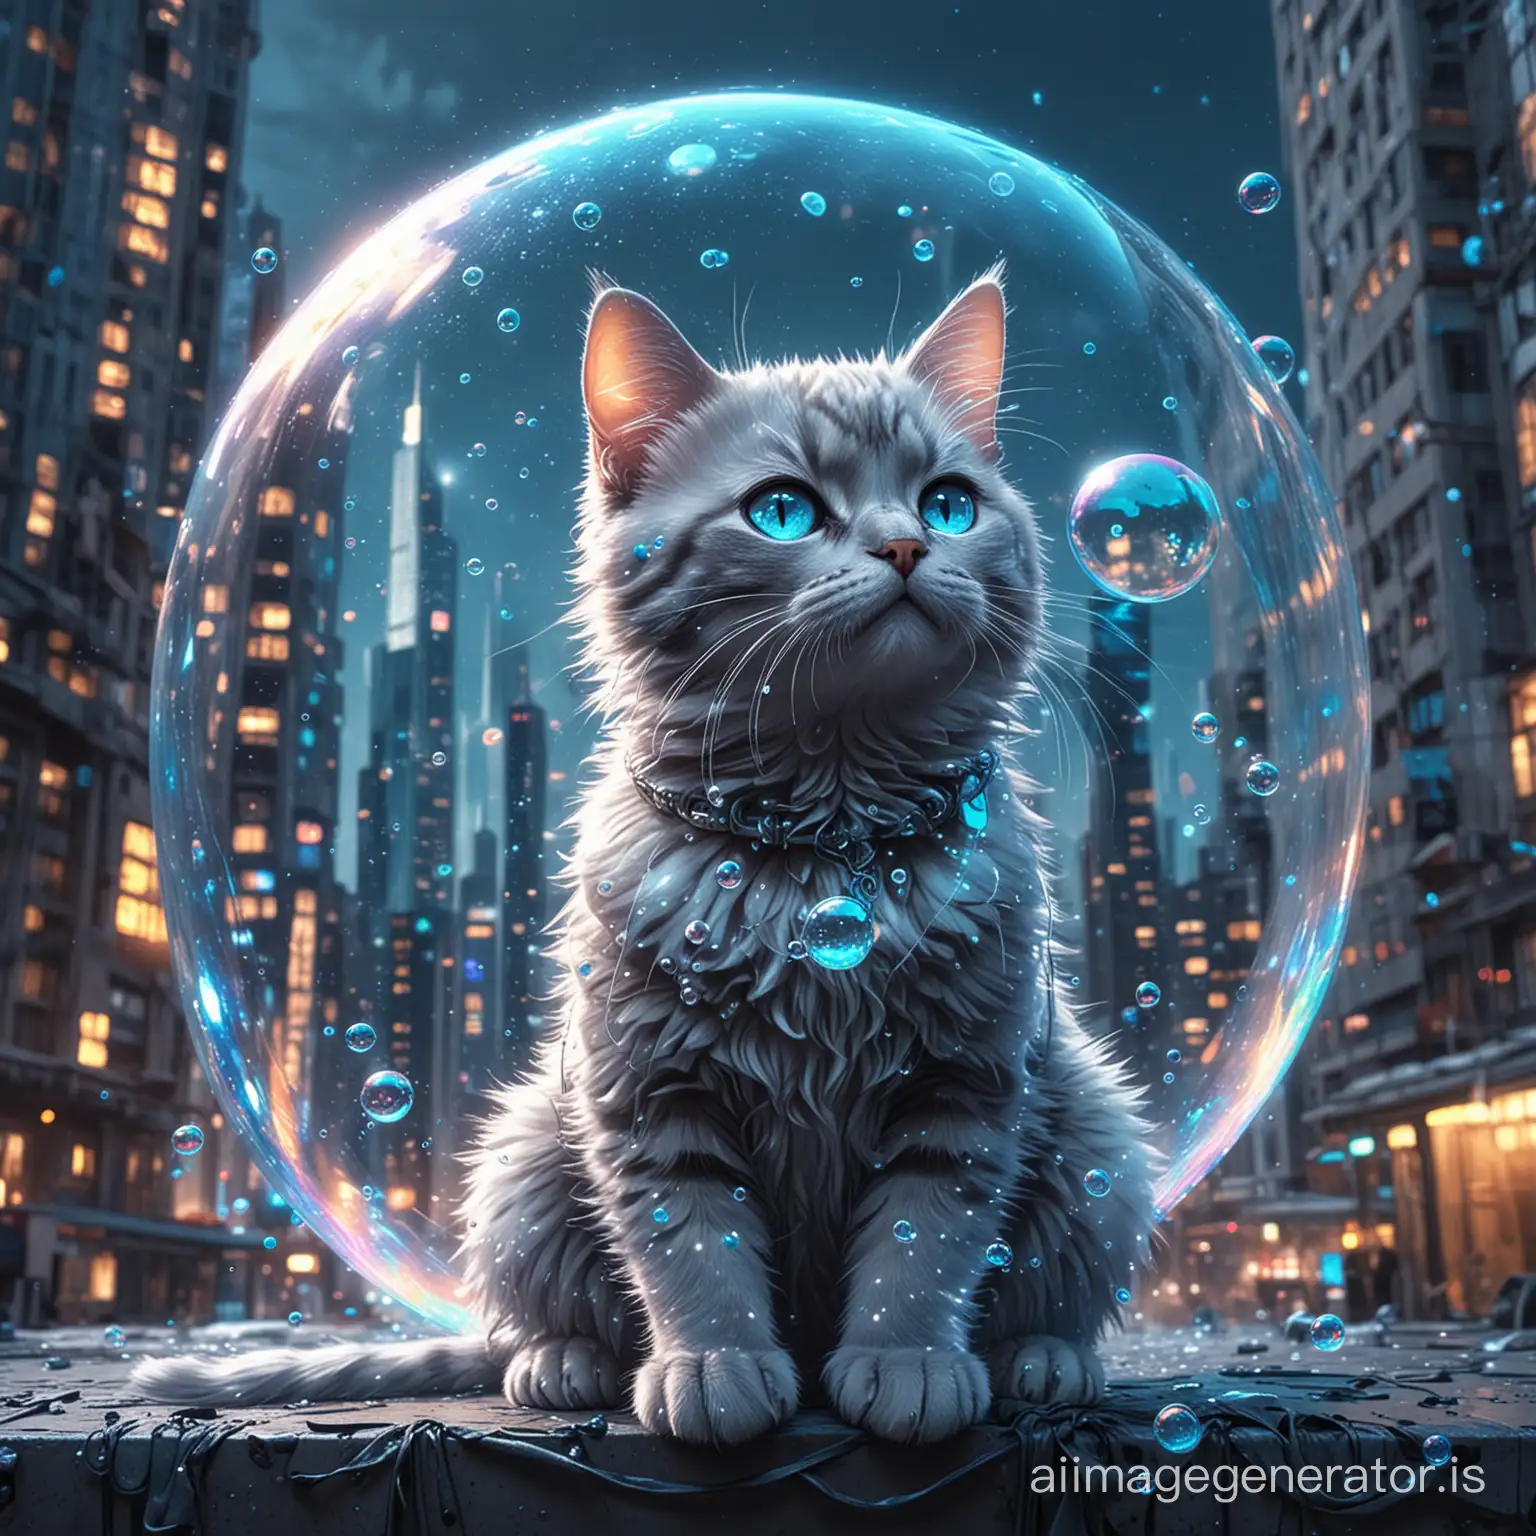 A cat wrapped in bubbles, bubbles glowing blue, cyberpunk, high-rise building background